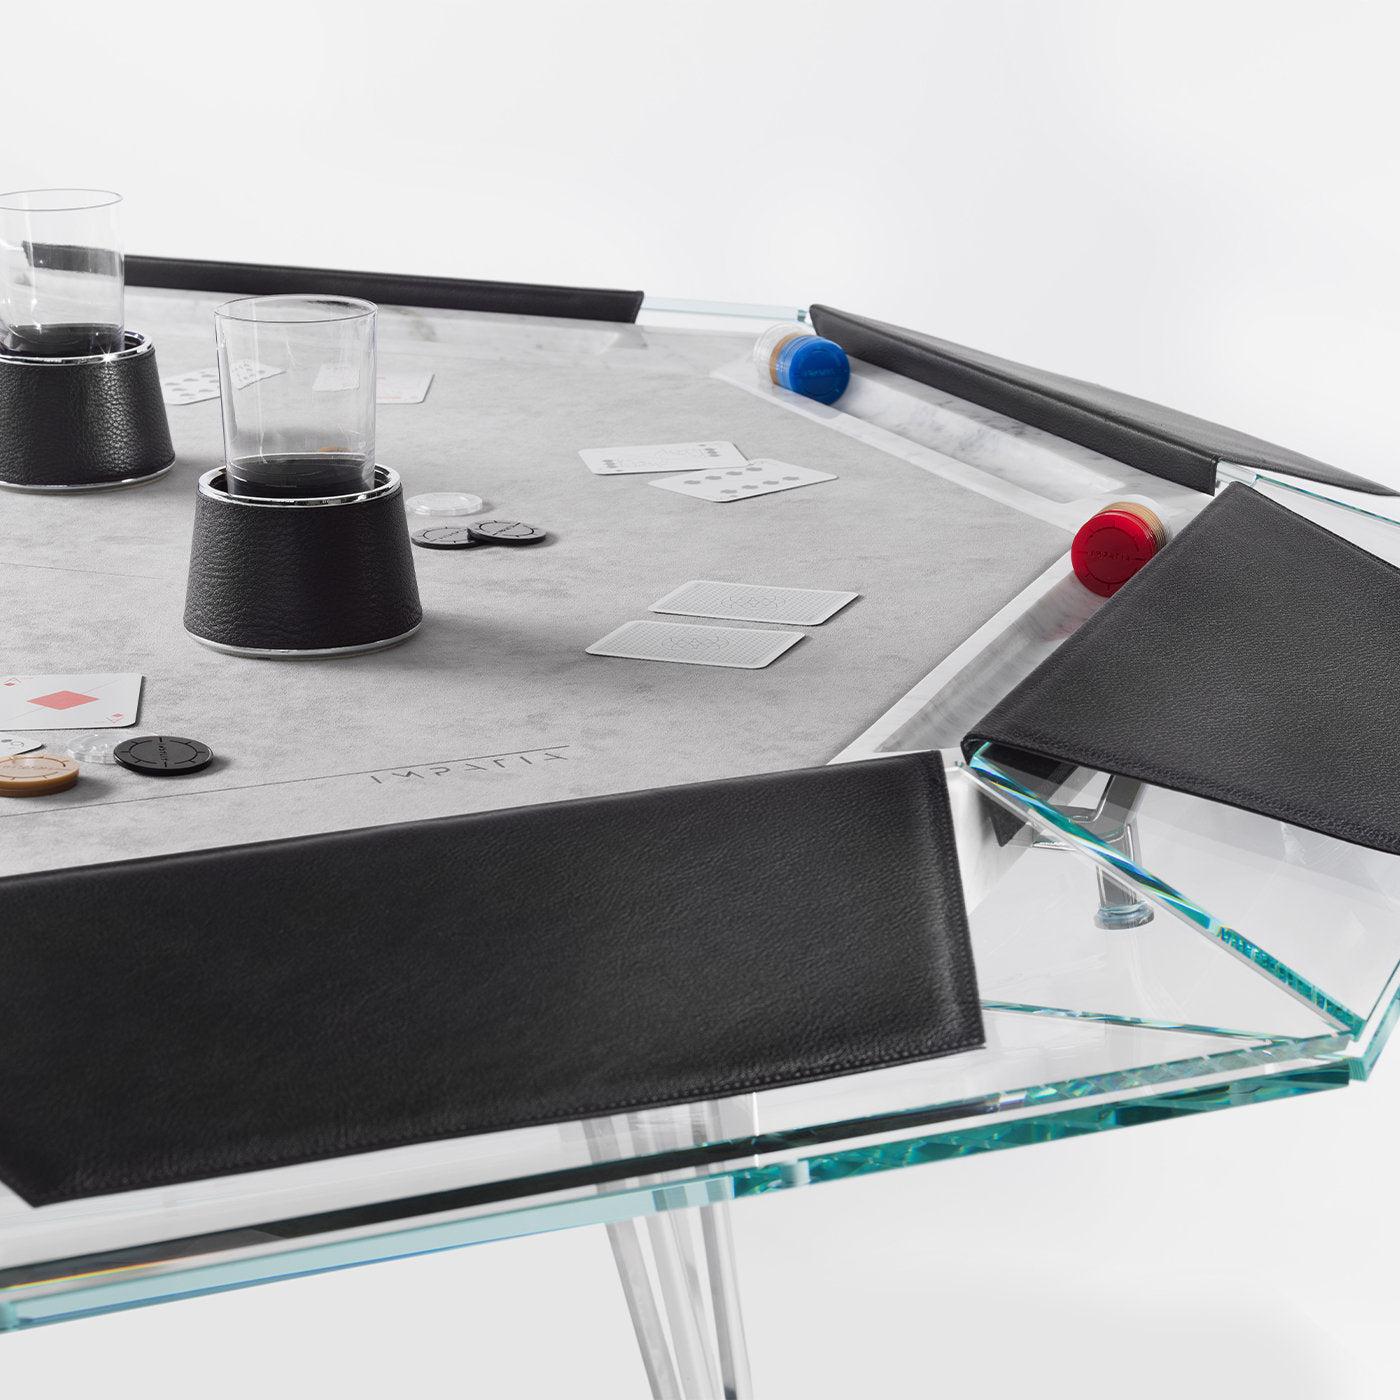 Unootto Marble Edition Ten-Player Poker Table - Alternative view 2